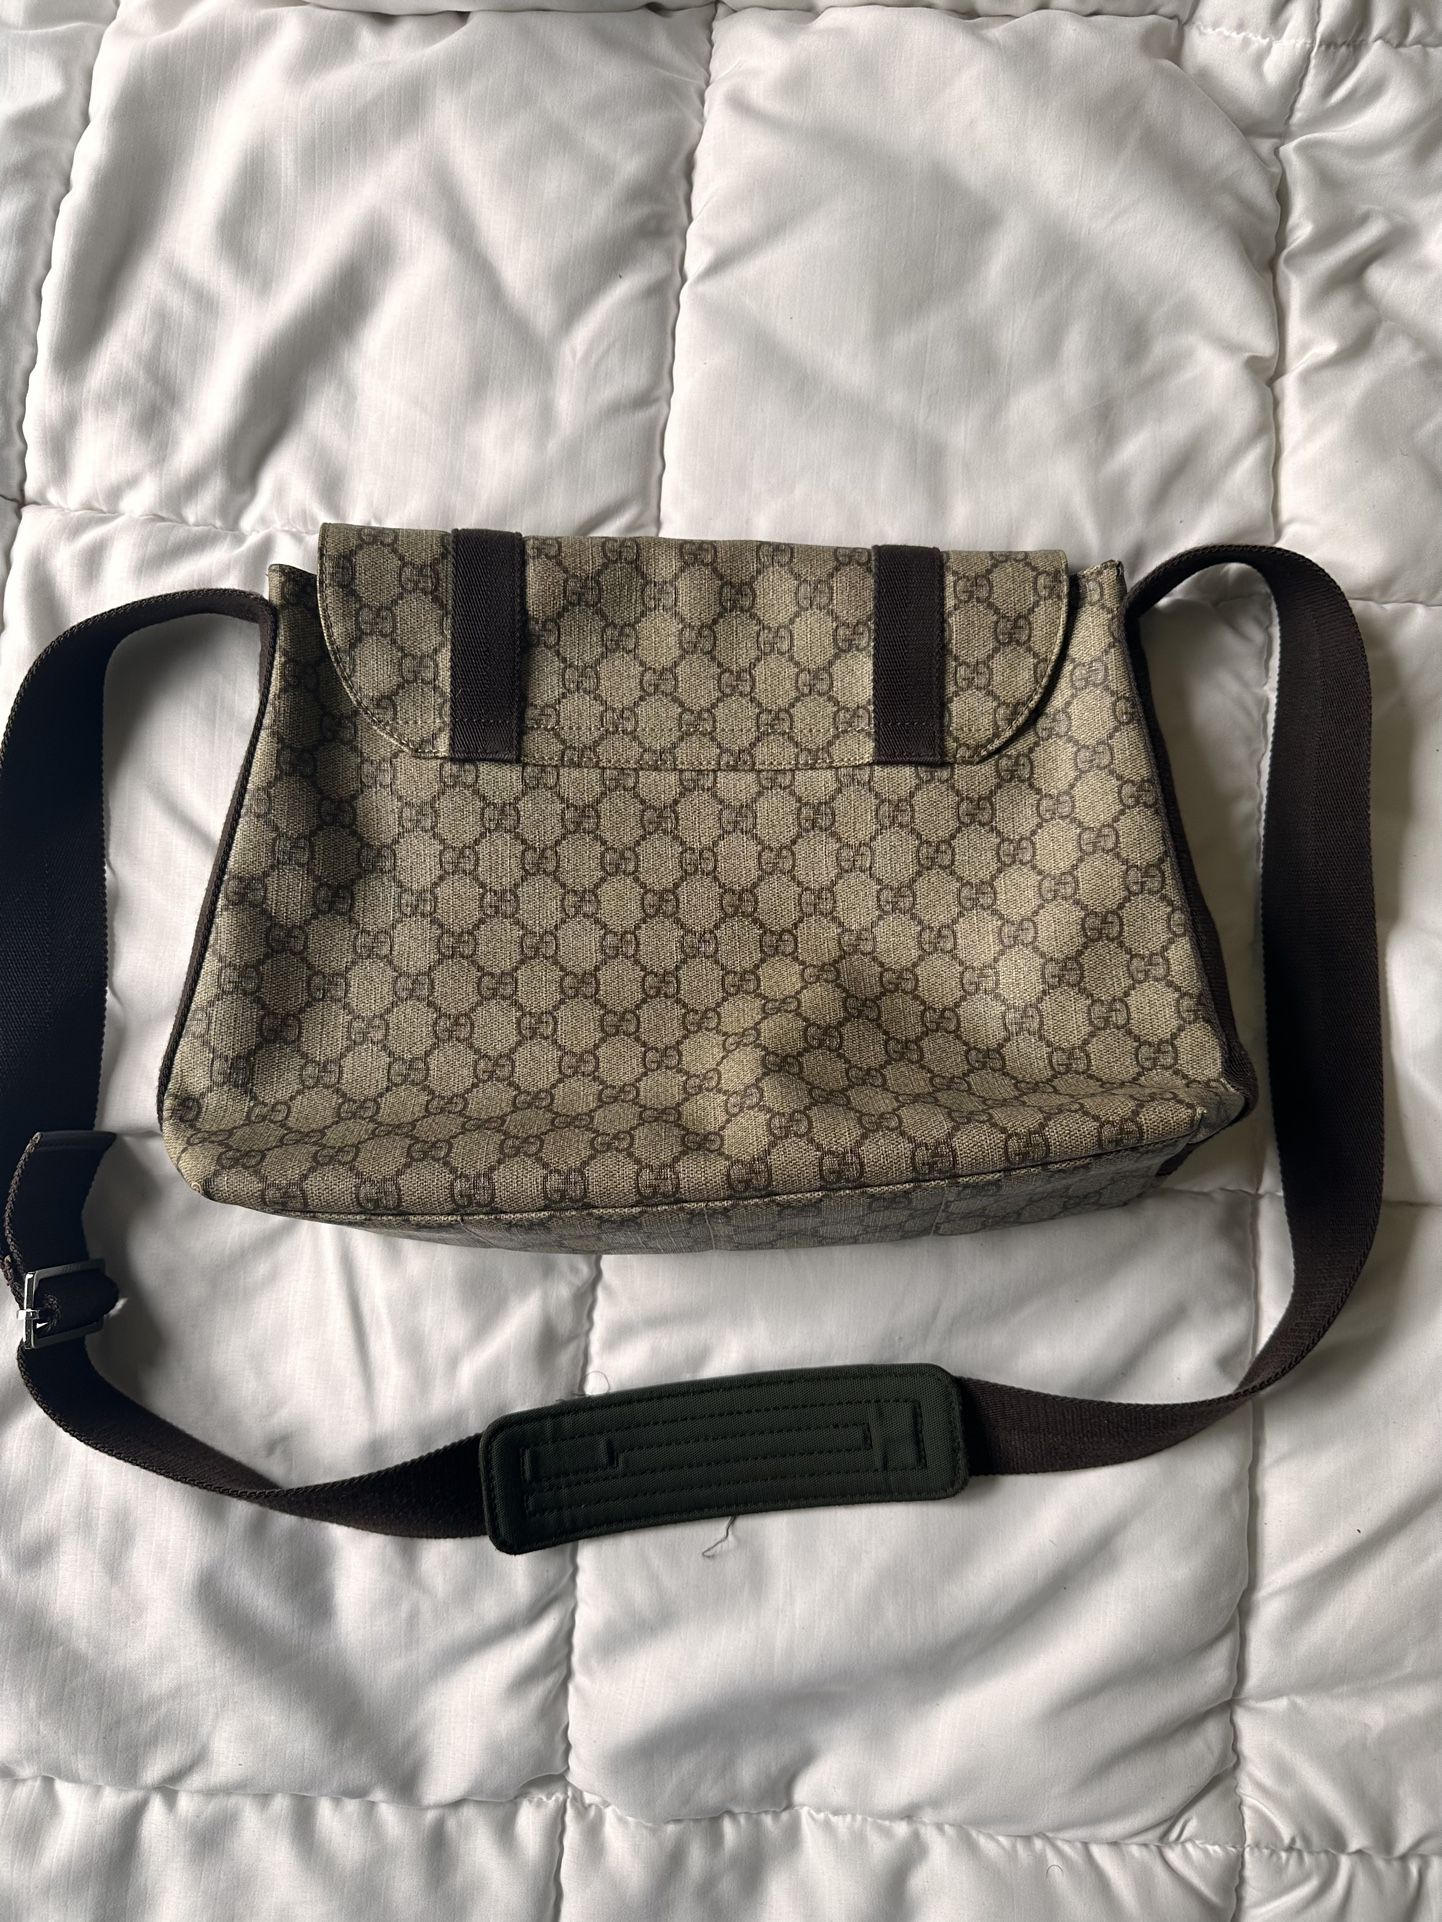 Gucci Messenger Bag for Sale in Staten Island, NY - OfferUp